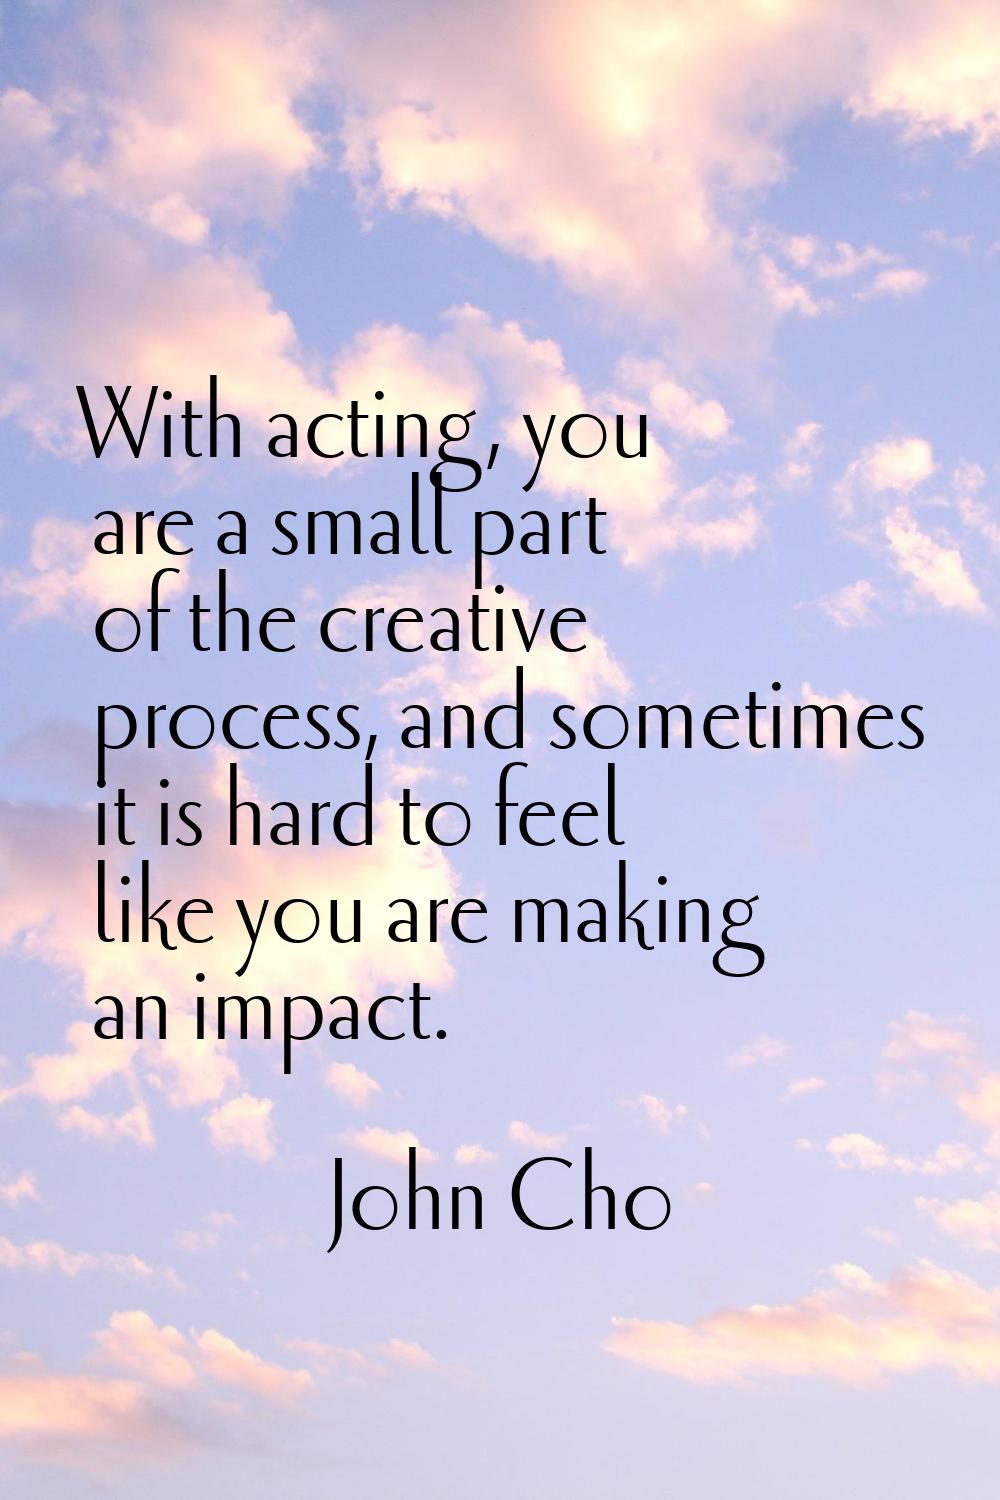 With acting, you are a small part of the creative process, and sometimes it is hard to feel like yo